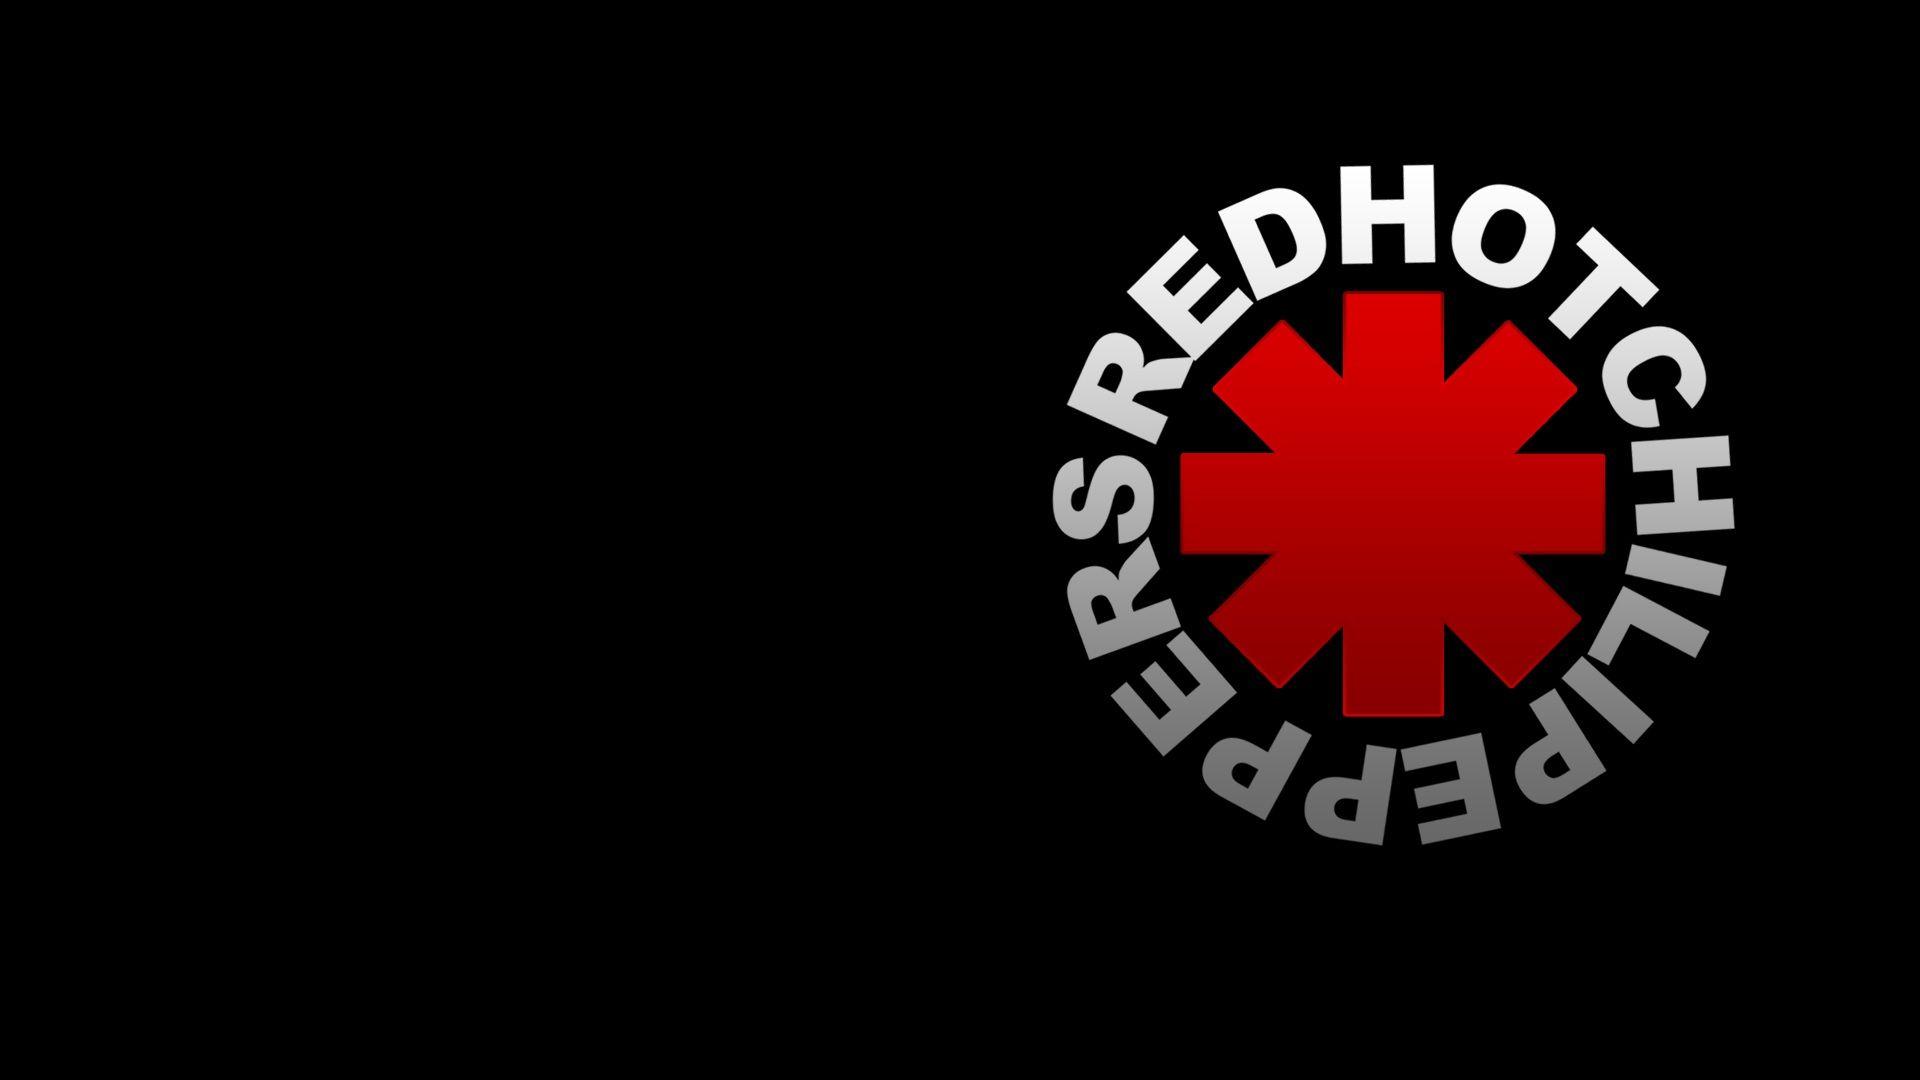 Red hot chili peppers 1080P 2K 4K 5K HD wallpapers free download   Wallpaper Flare